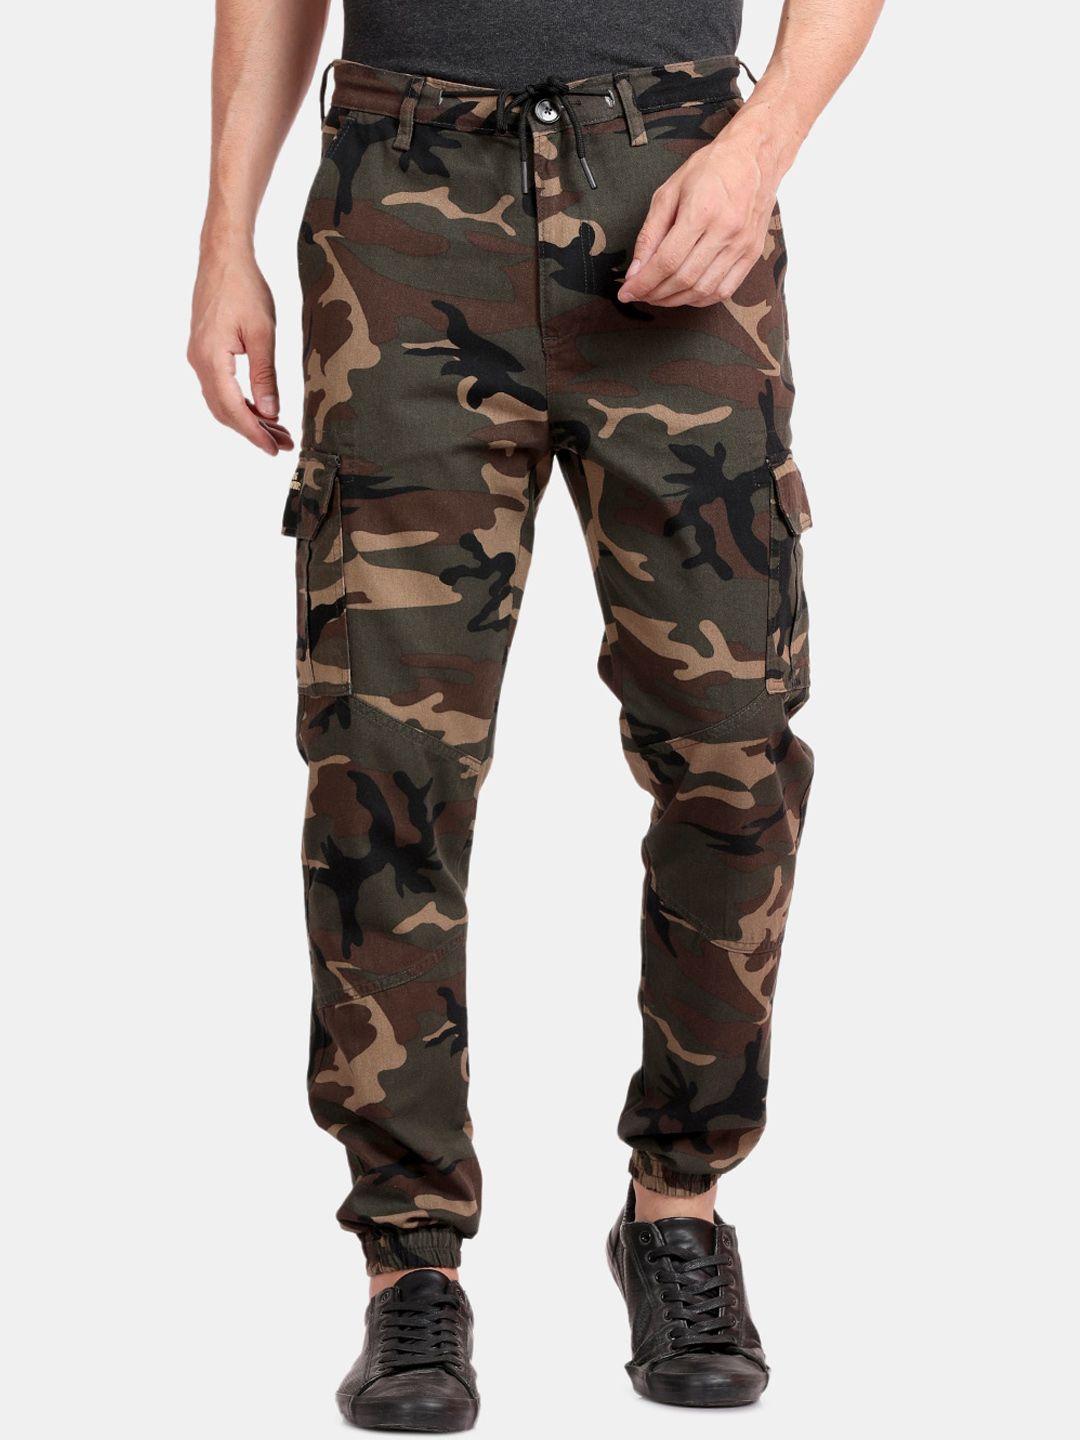 rug-woods-men-classic-camouflage-printed-easy-wash-pure-cotton-cargos